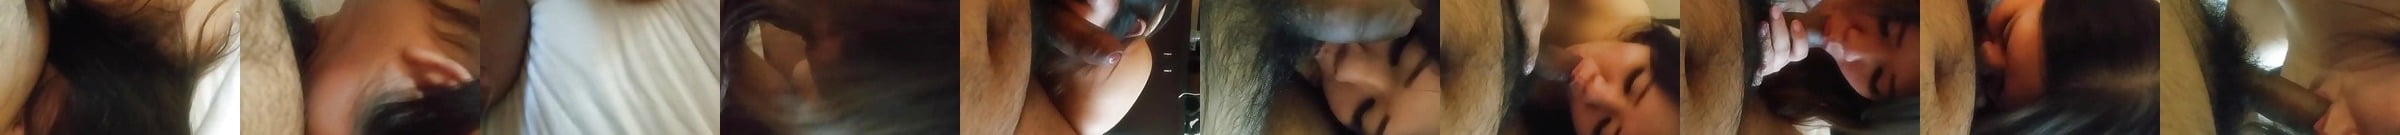 Amateur Asian Hooker Threesome Free New Asian Tube Porn Video Xhamster